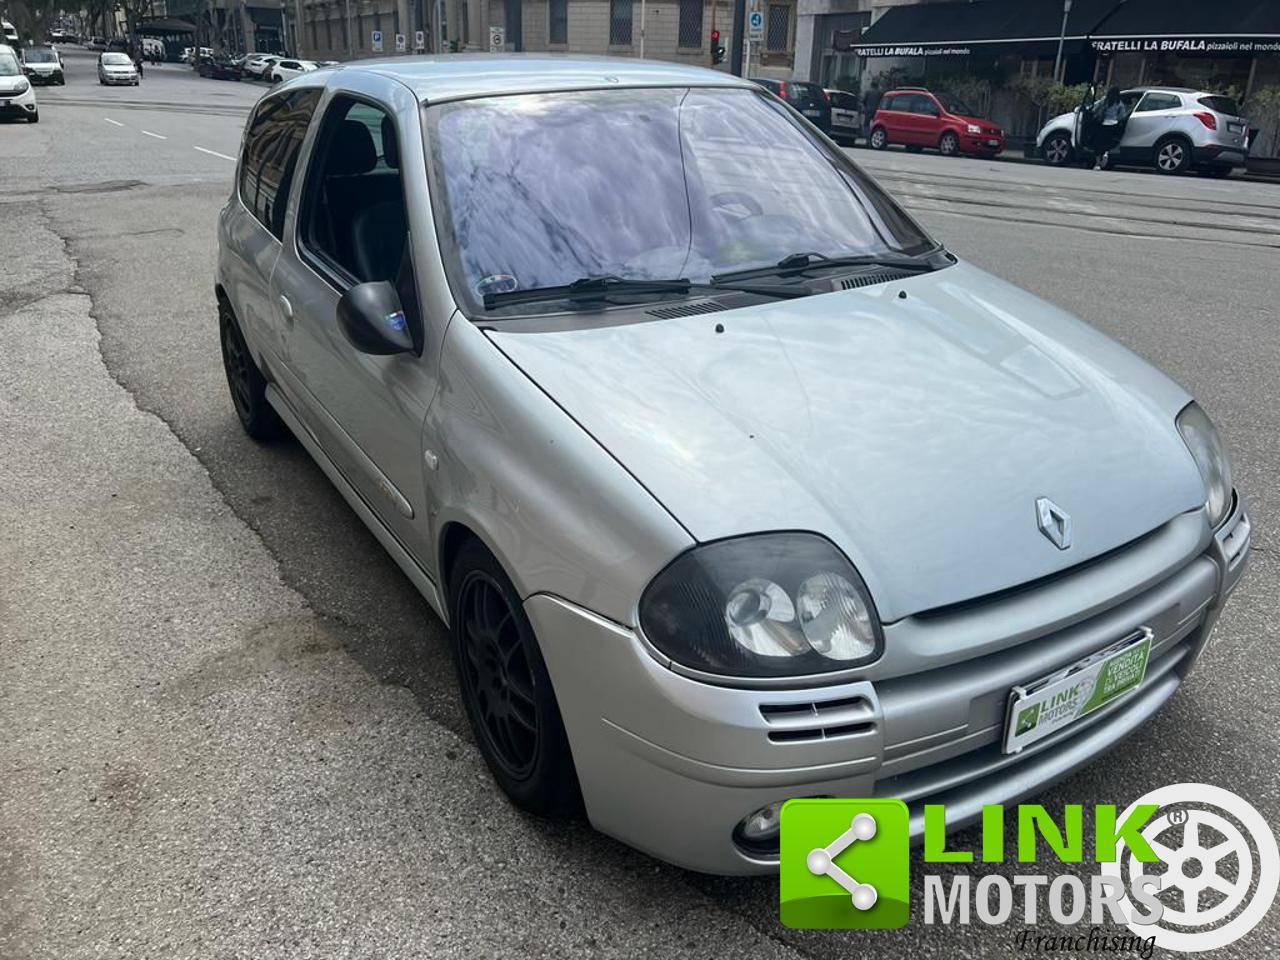 For Sale: Renault Clio II 2.0 16V Sport (2000) offered for €8,800